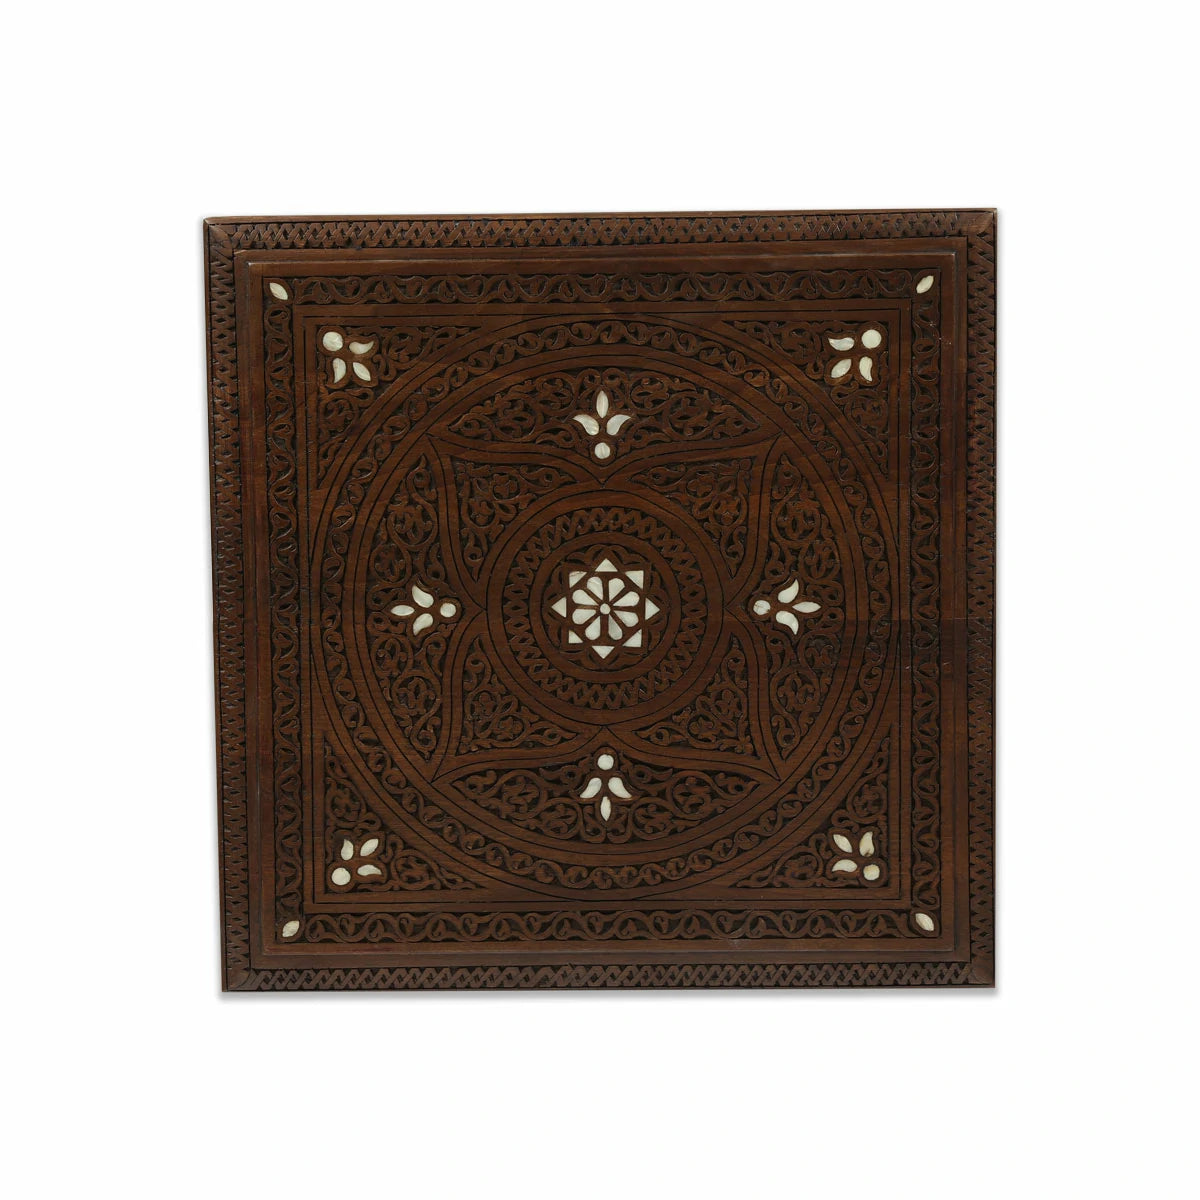 Artistic Mother of Pearl Inlay & Carvings on Walnut Wood Table in Traditional Moorish Patterns